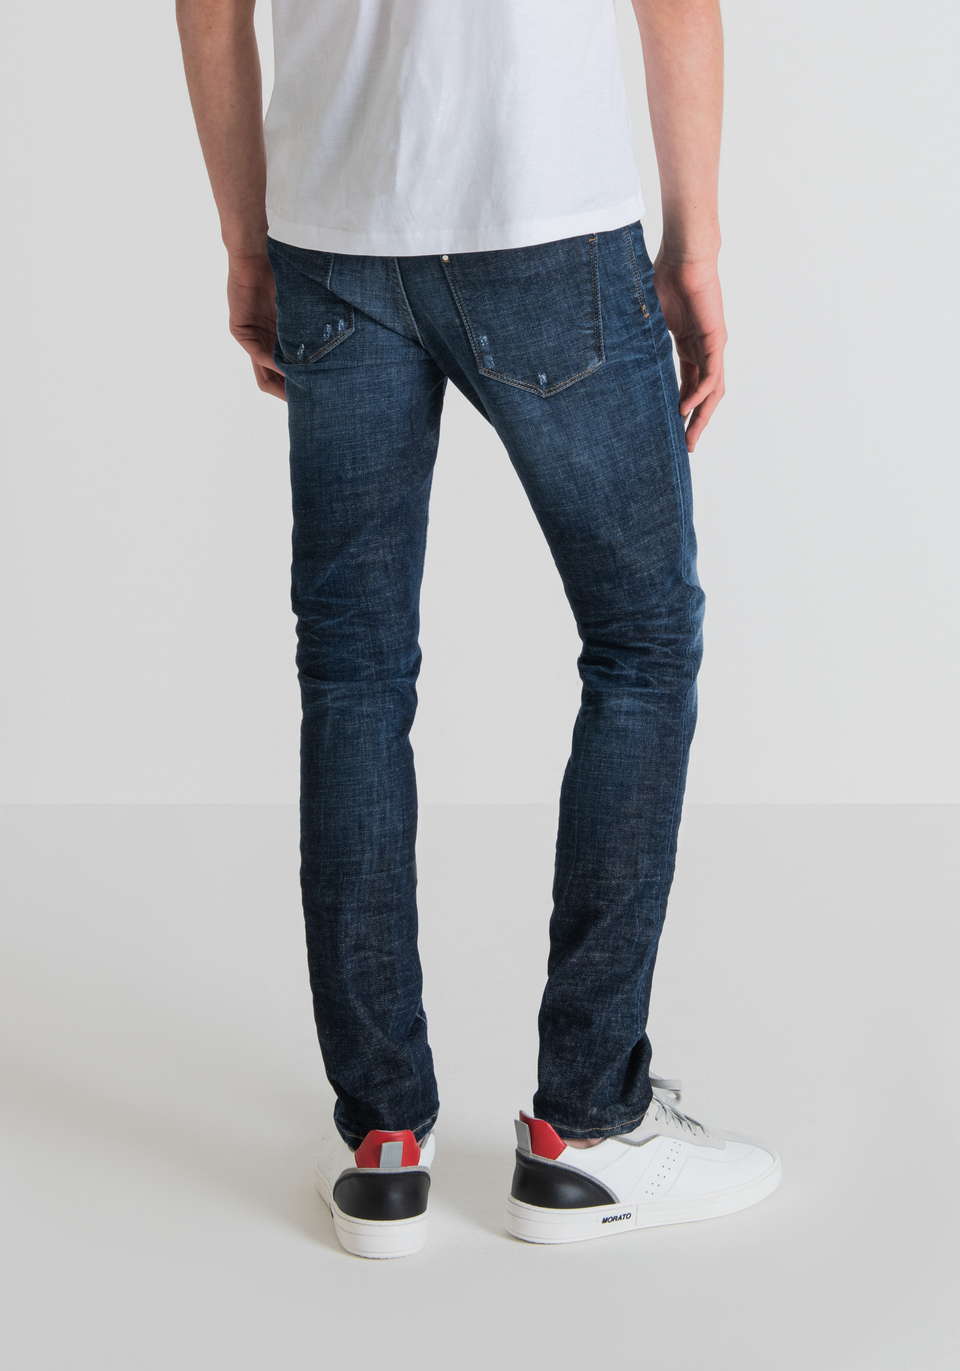 “GILMOUR” SUPER SKINNY FIT JEANS IN RECYCLED COTTON - Antony Morato Online Shop